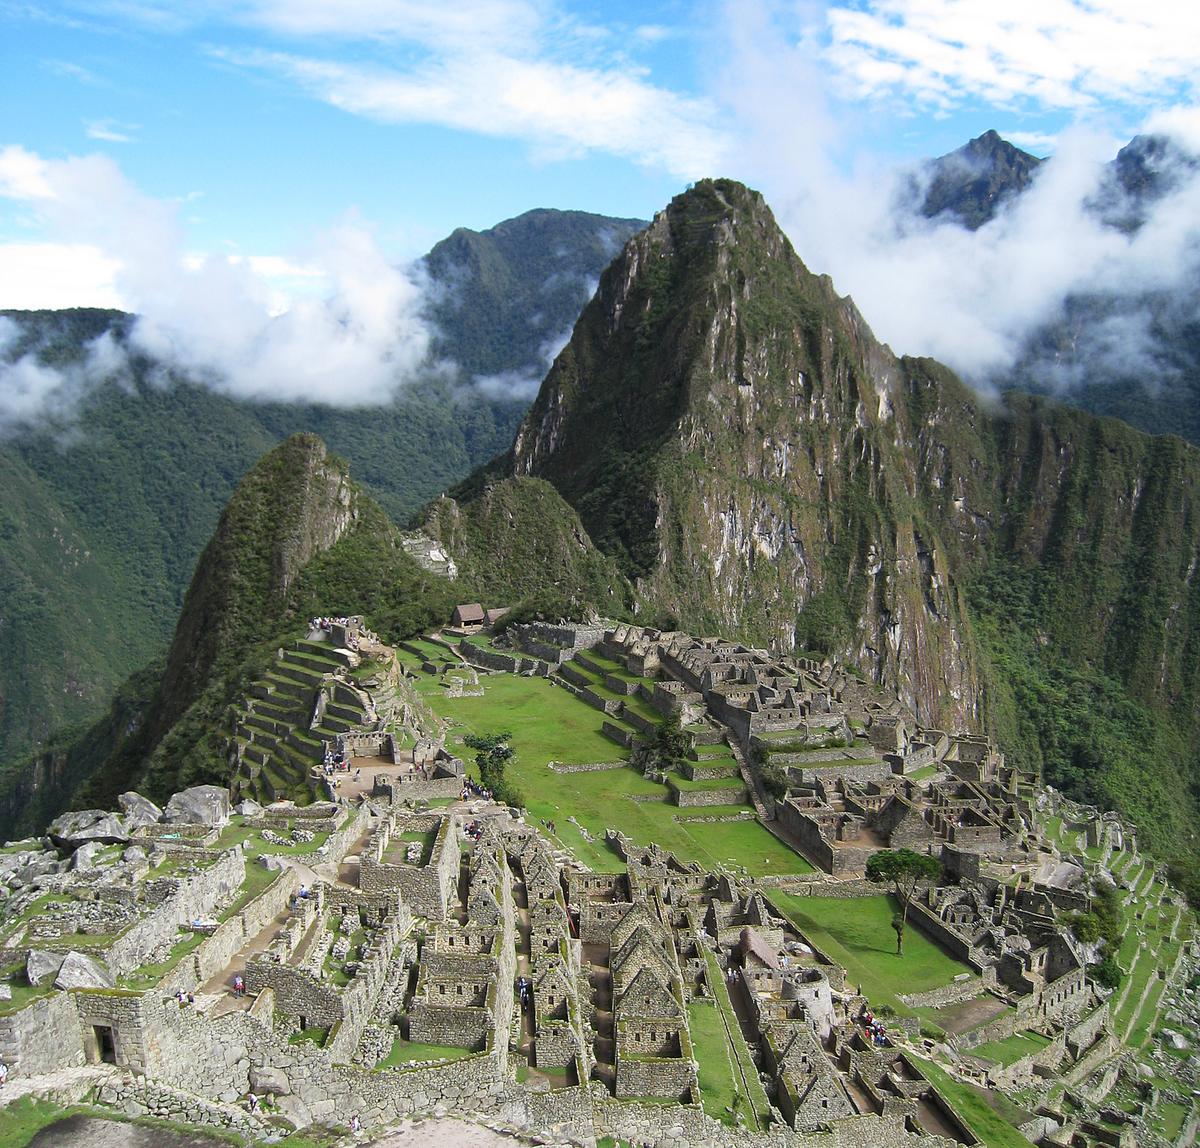 Machu Picchu seen from a high, cloud-strewn perch amid the southern Peruvian Andes. (<a href="https://commons.wikimedia.org/wiki/File:Before_Machu_Picchu.jpg">icelight</a>/CC BY 2.0)